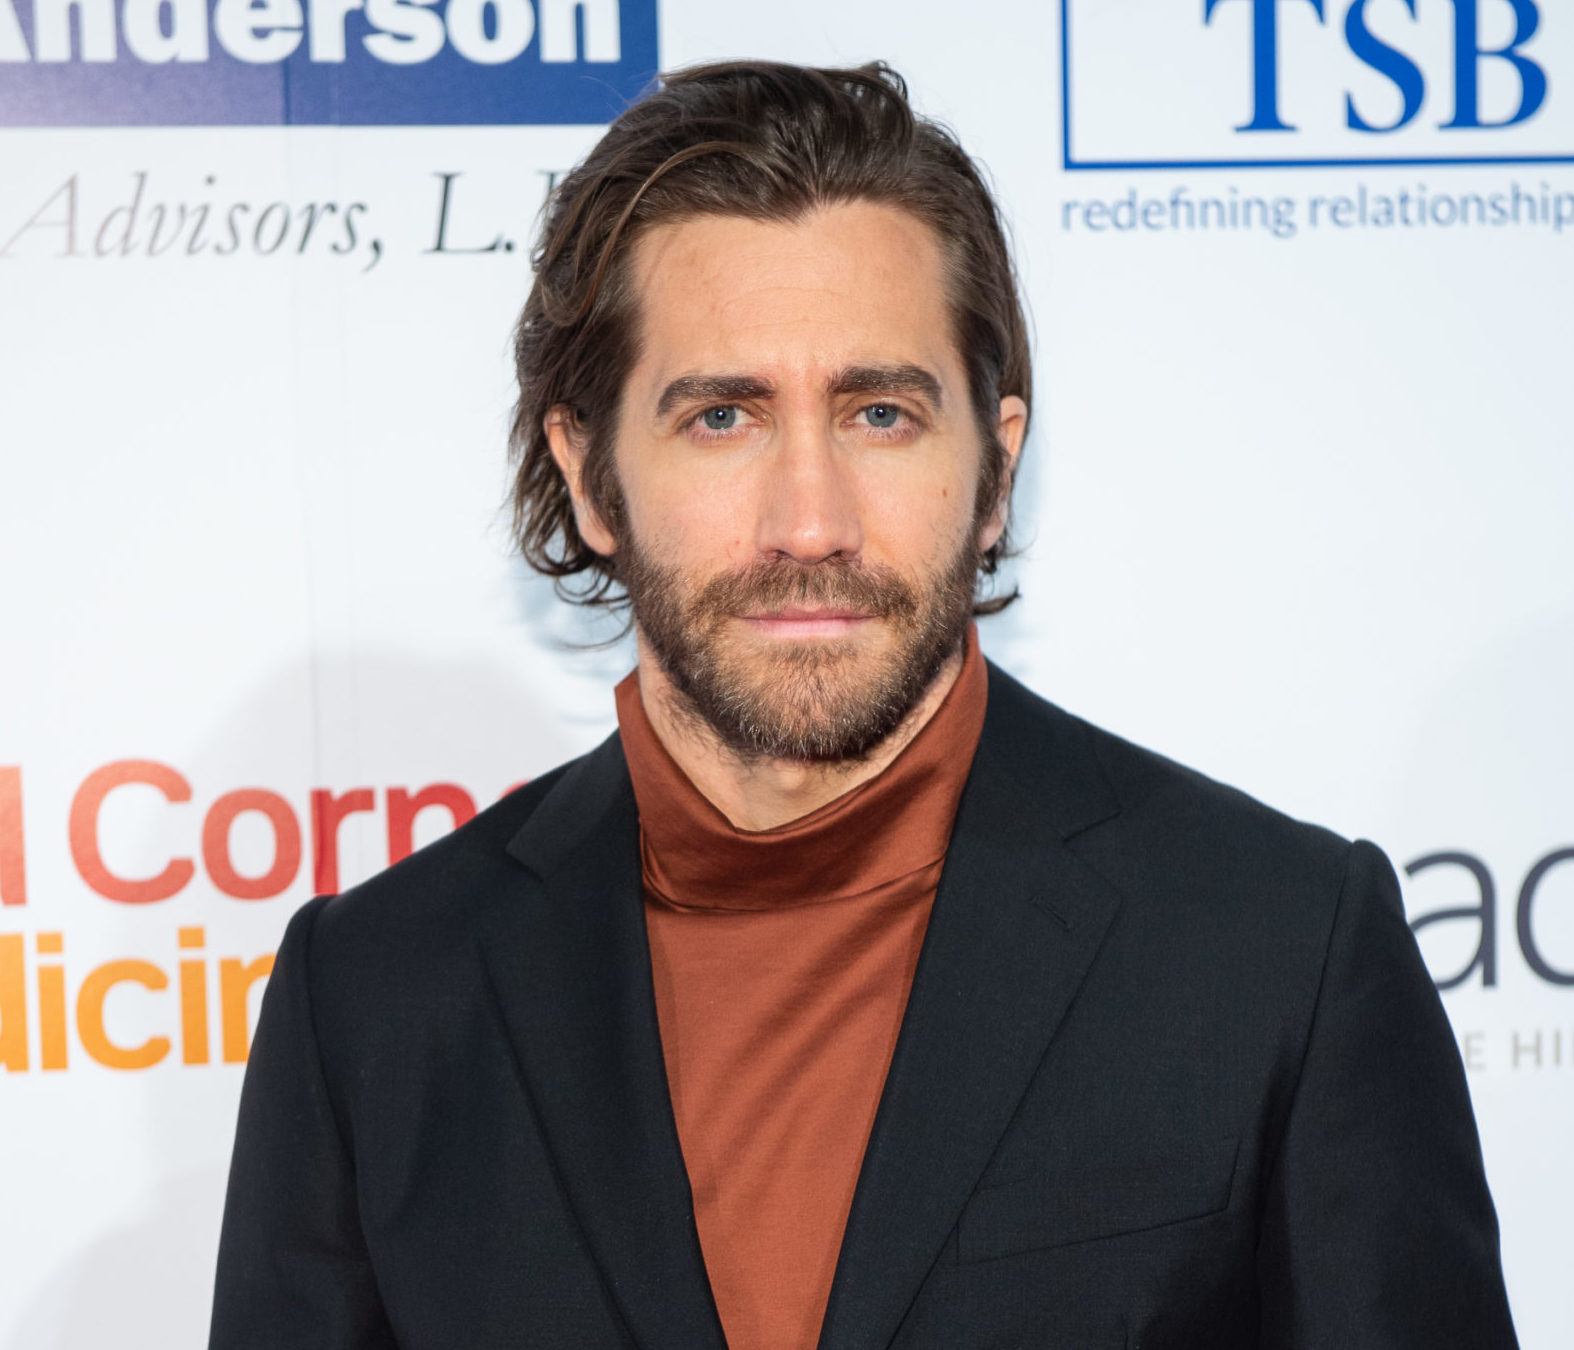 Actor Jake Gyllenhaal reveals in a new interview that he ...